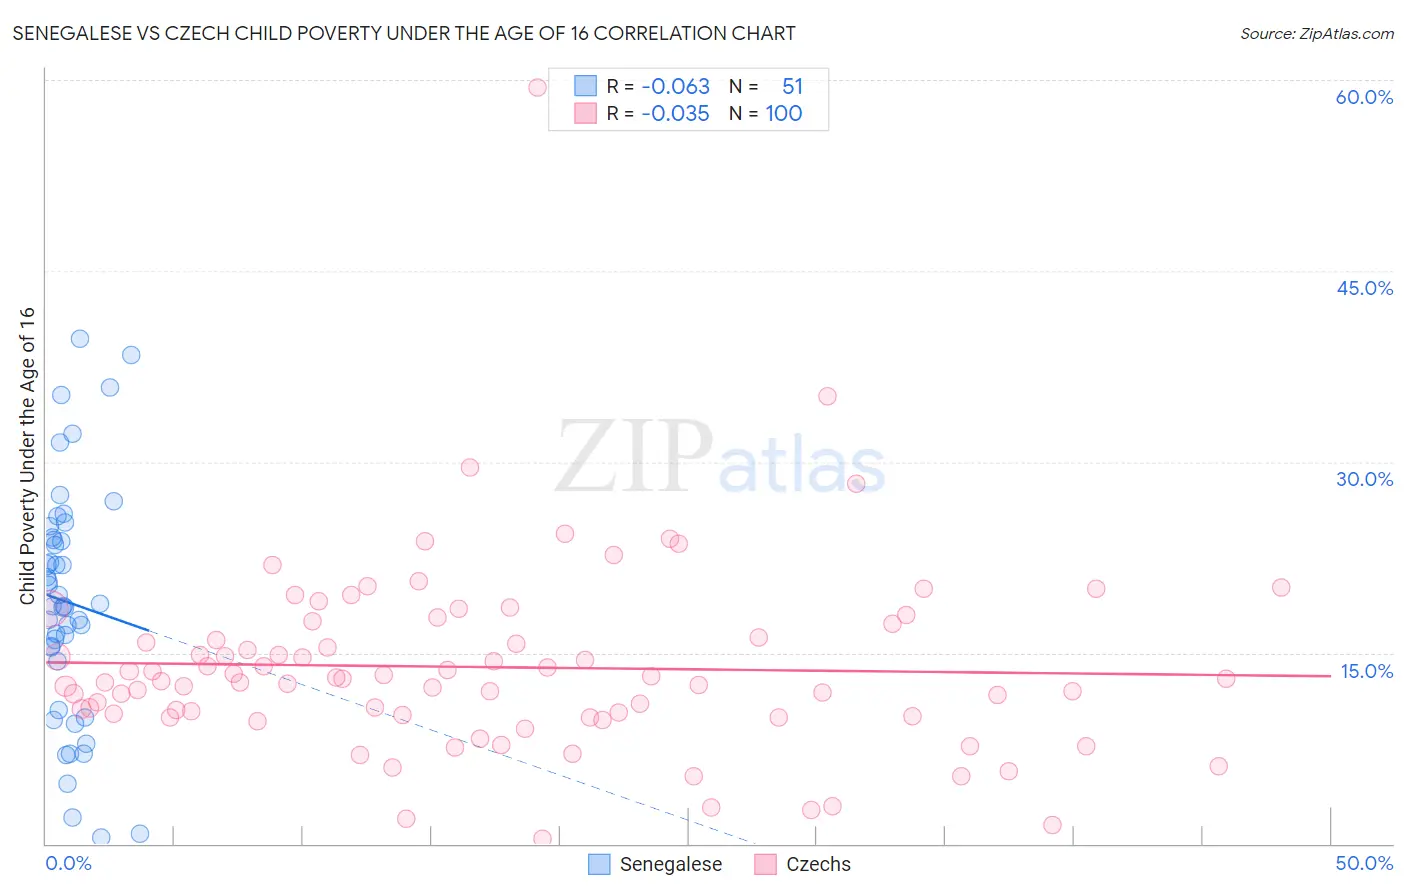 Senegalese vs Czech Child Poverty Under the Age of 16